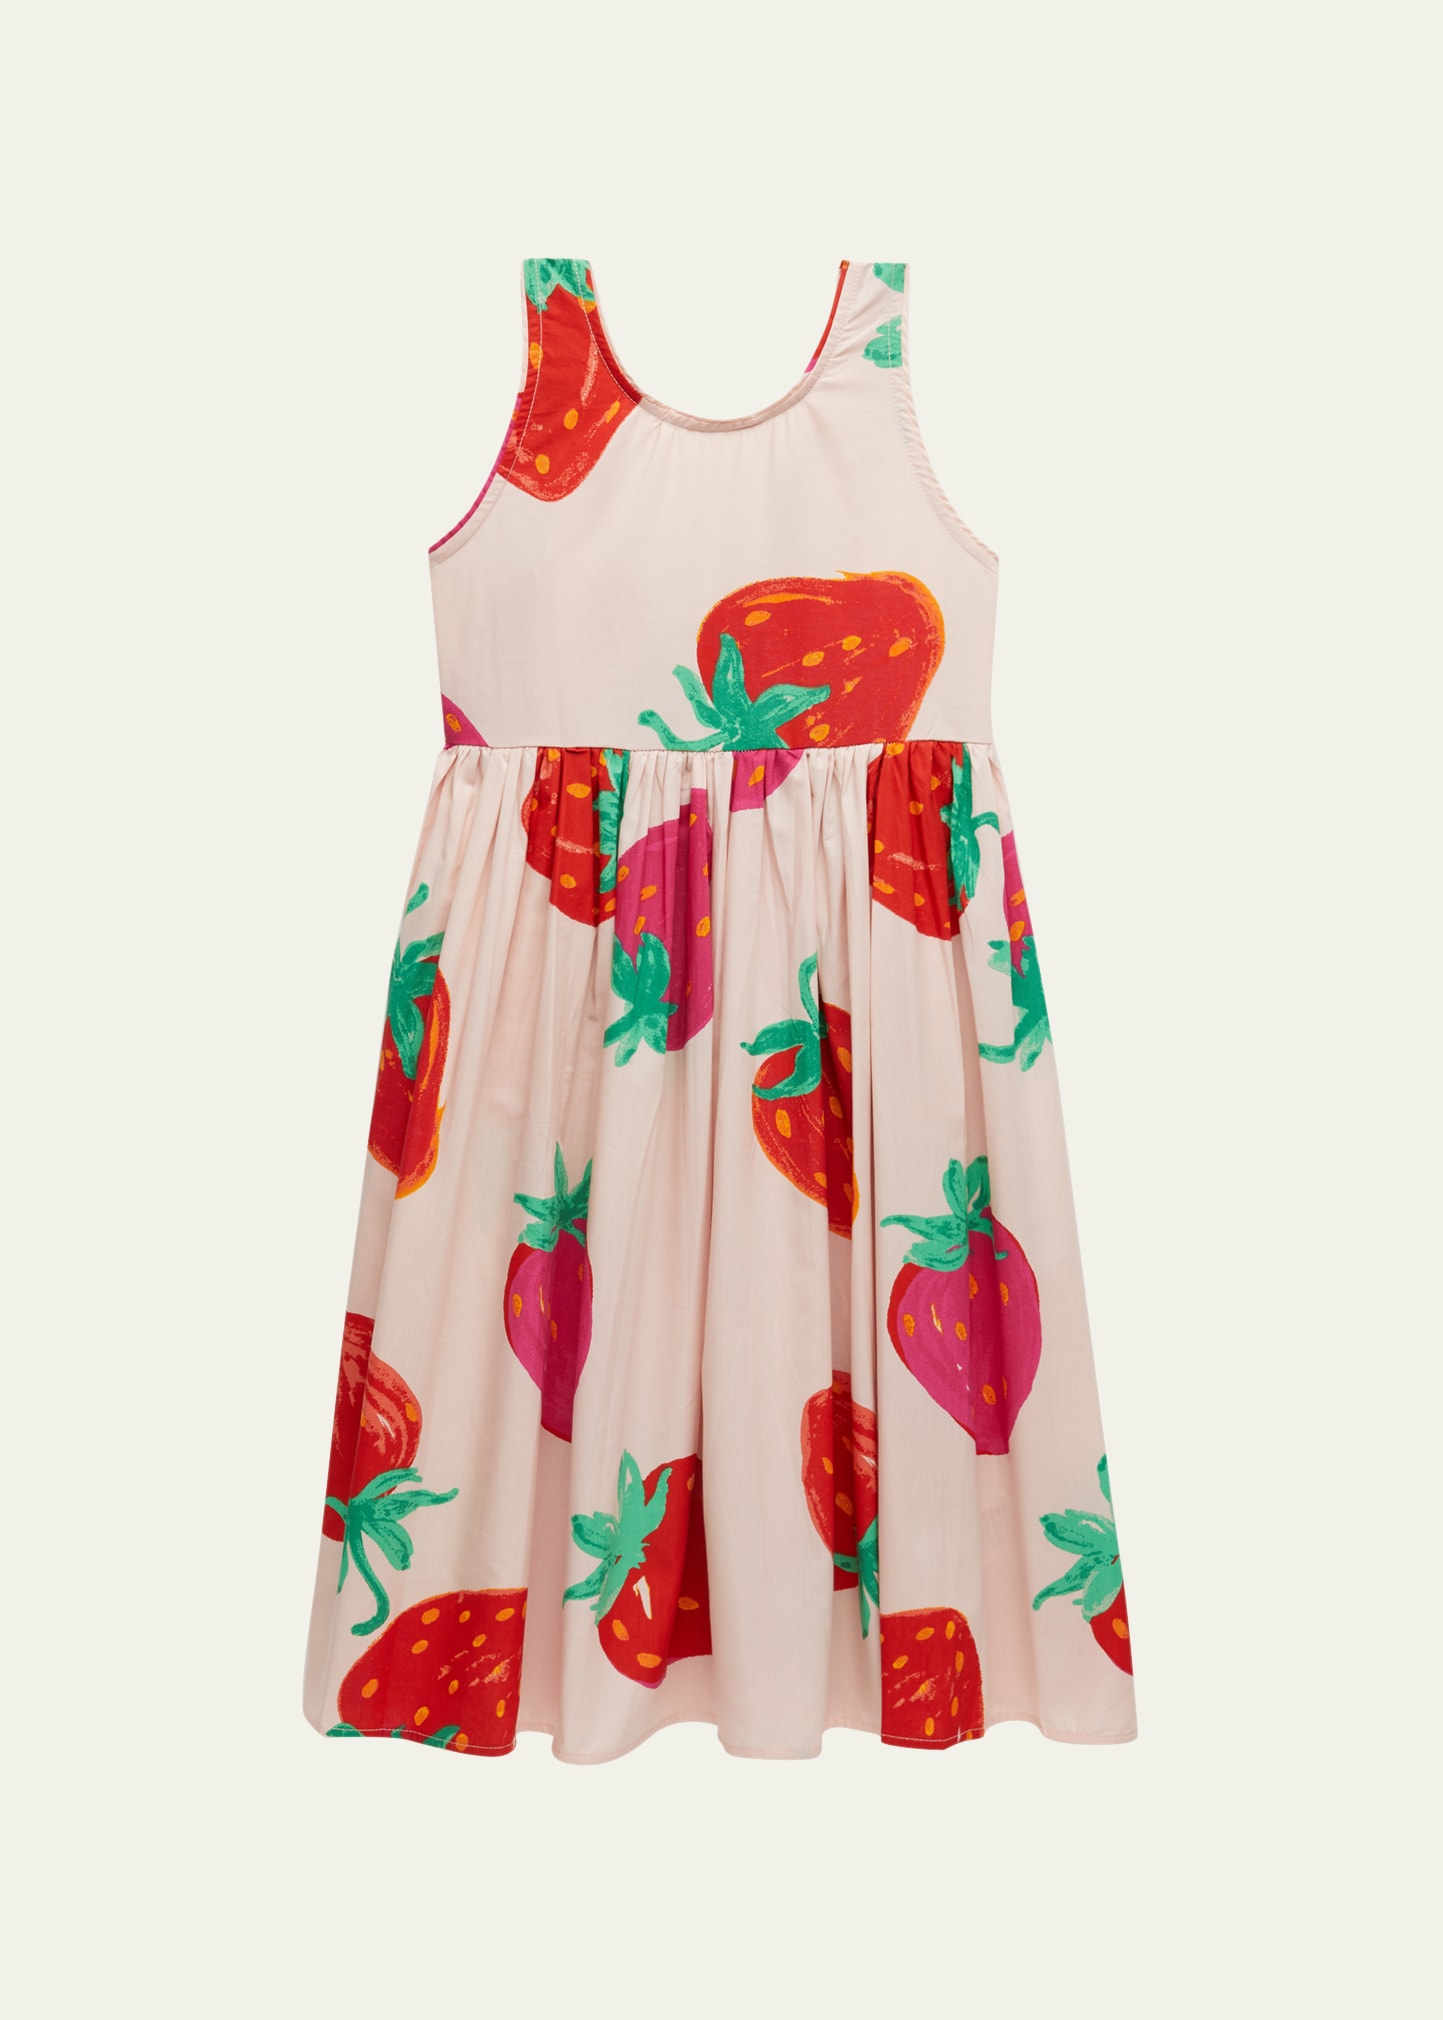 Girl's Clover Strawberry Graphic-Print Dress, Size 3T-12